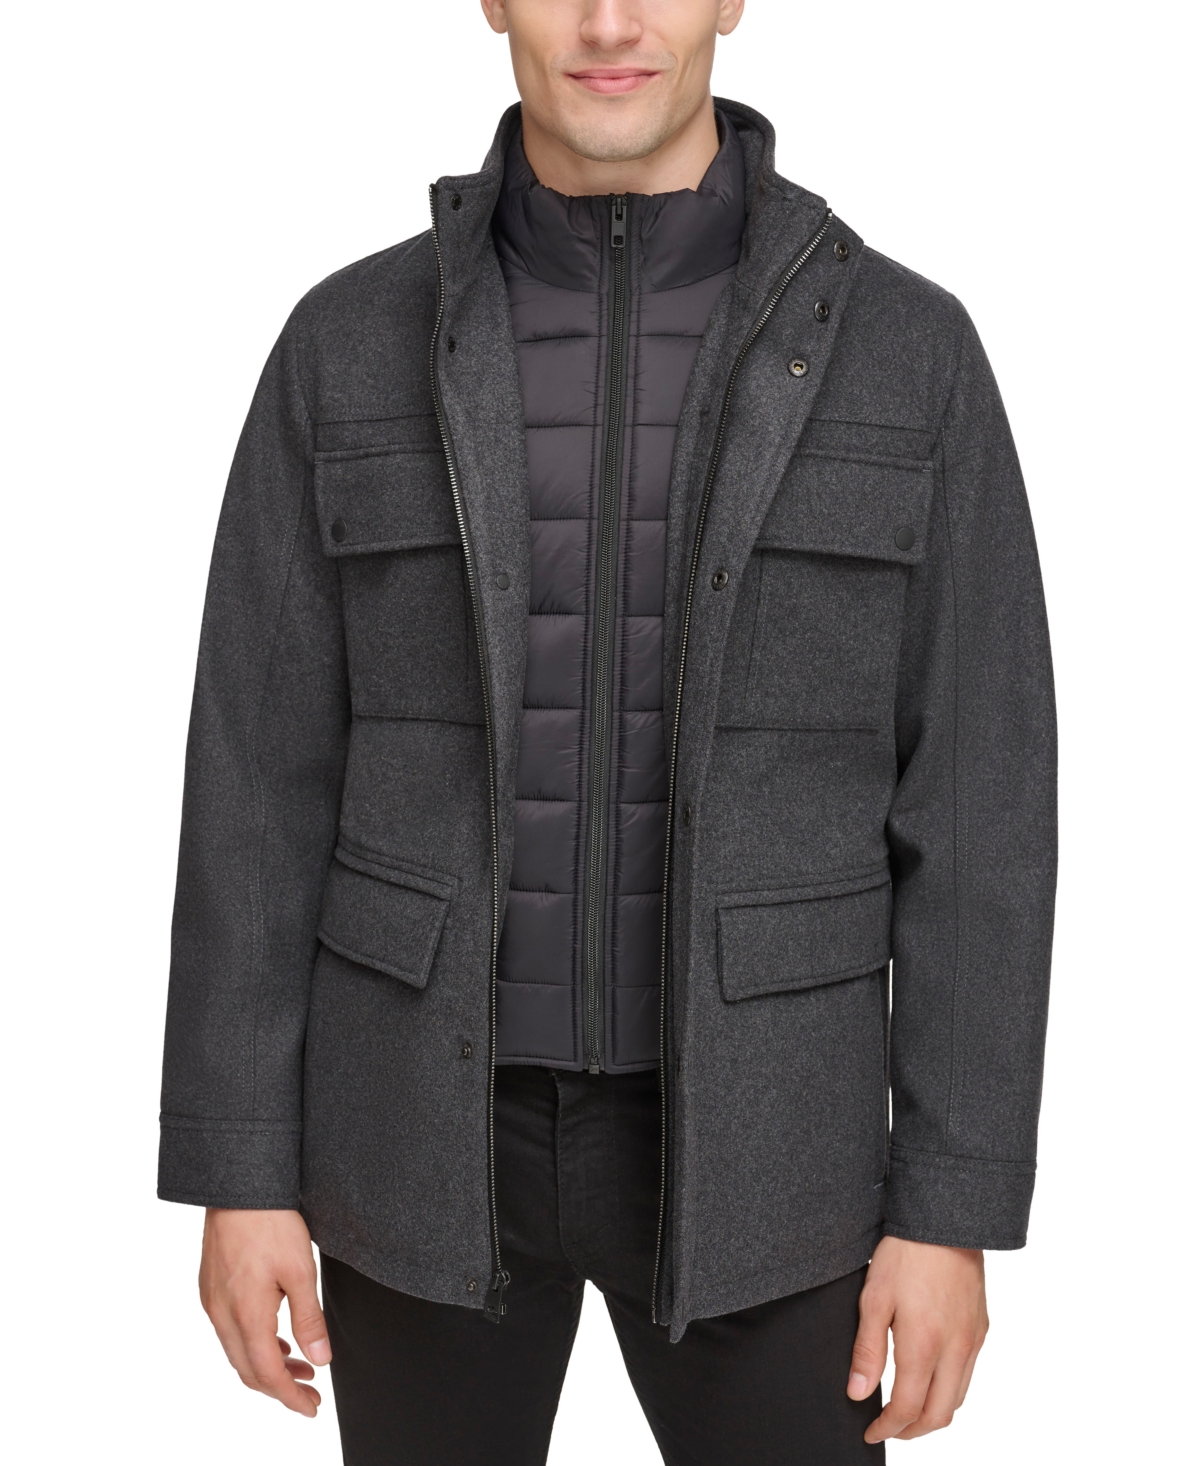 Guess Men's Water-repellent Jacket With Zip-out Quilted Puffer Bib In Charcoal